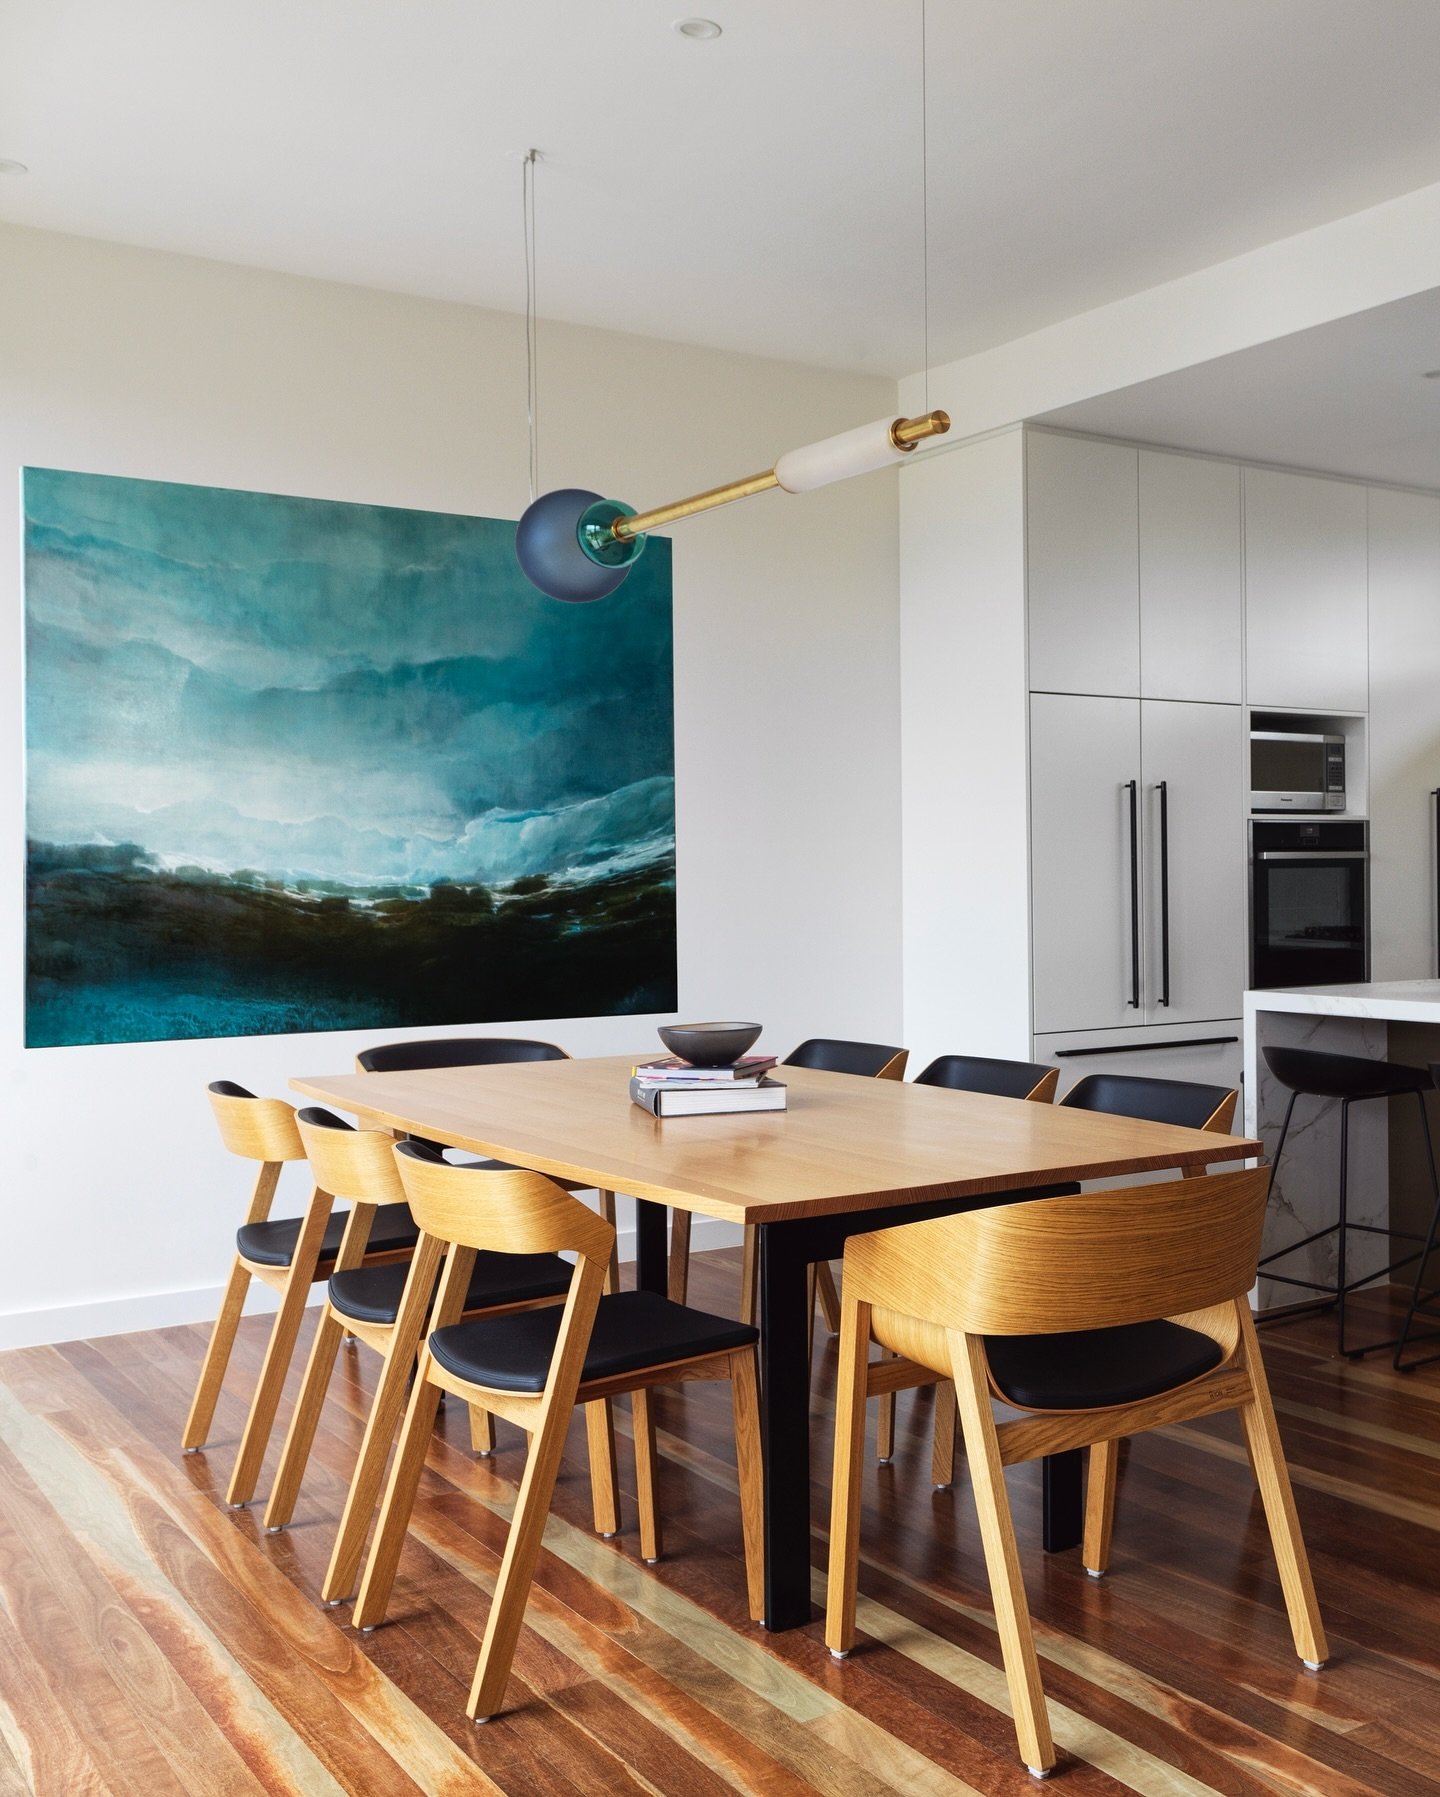 Our COMET Linear Pendant with custom coloured Glass Beads is the decorative jewel delivering functional light over the dining table in the Elwood Project crafted by interior designer @susiemilesdesign
Photographed by @naviivan

The mouth-blown glass 